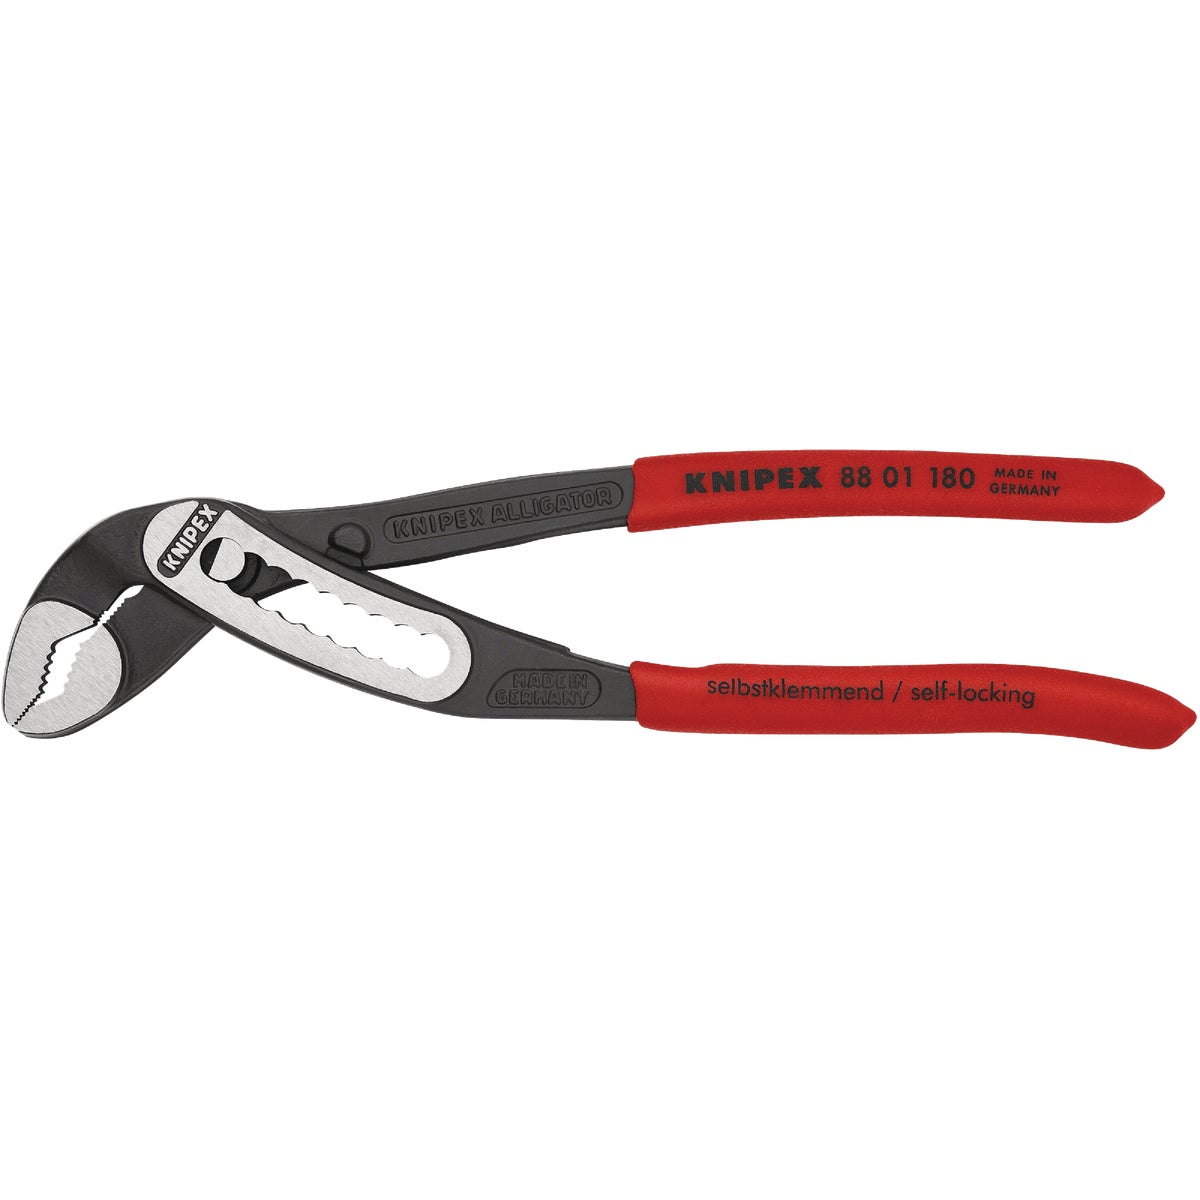 Knipex Alligator 7-1/4 In. Water Pump Groove Joint Pliers